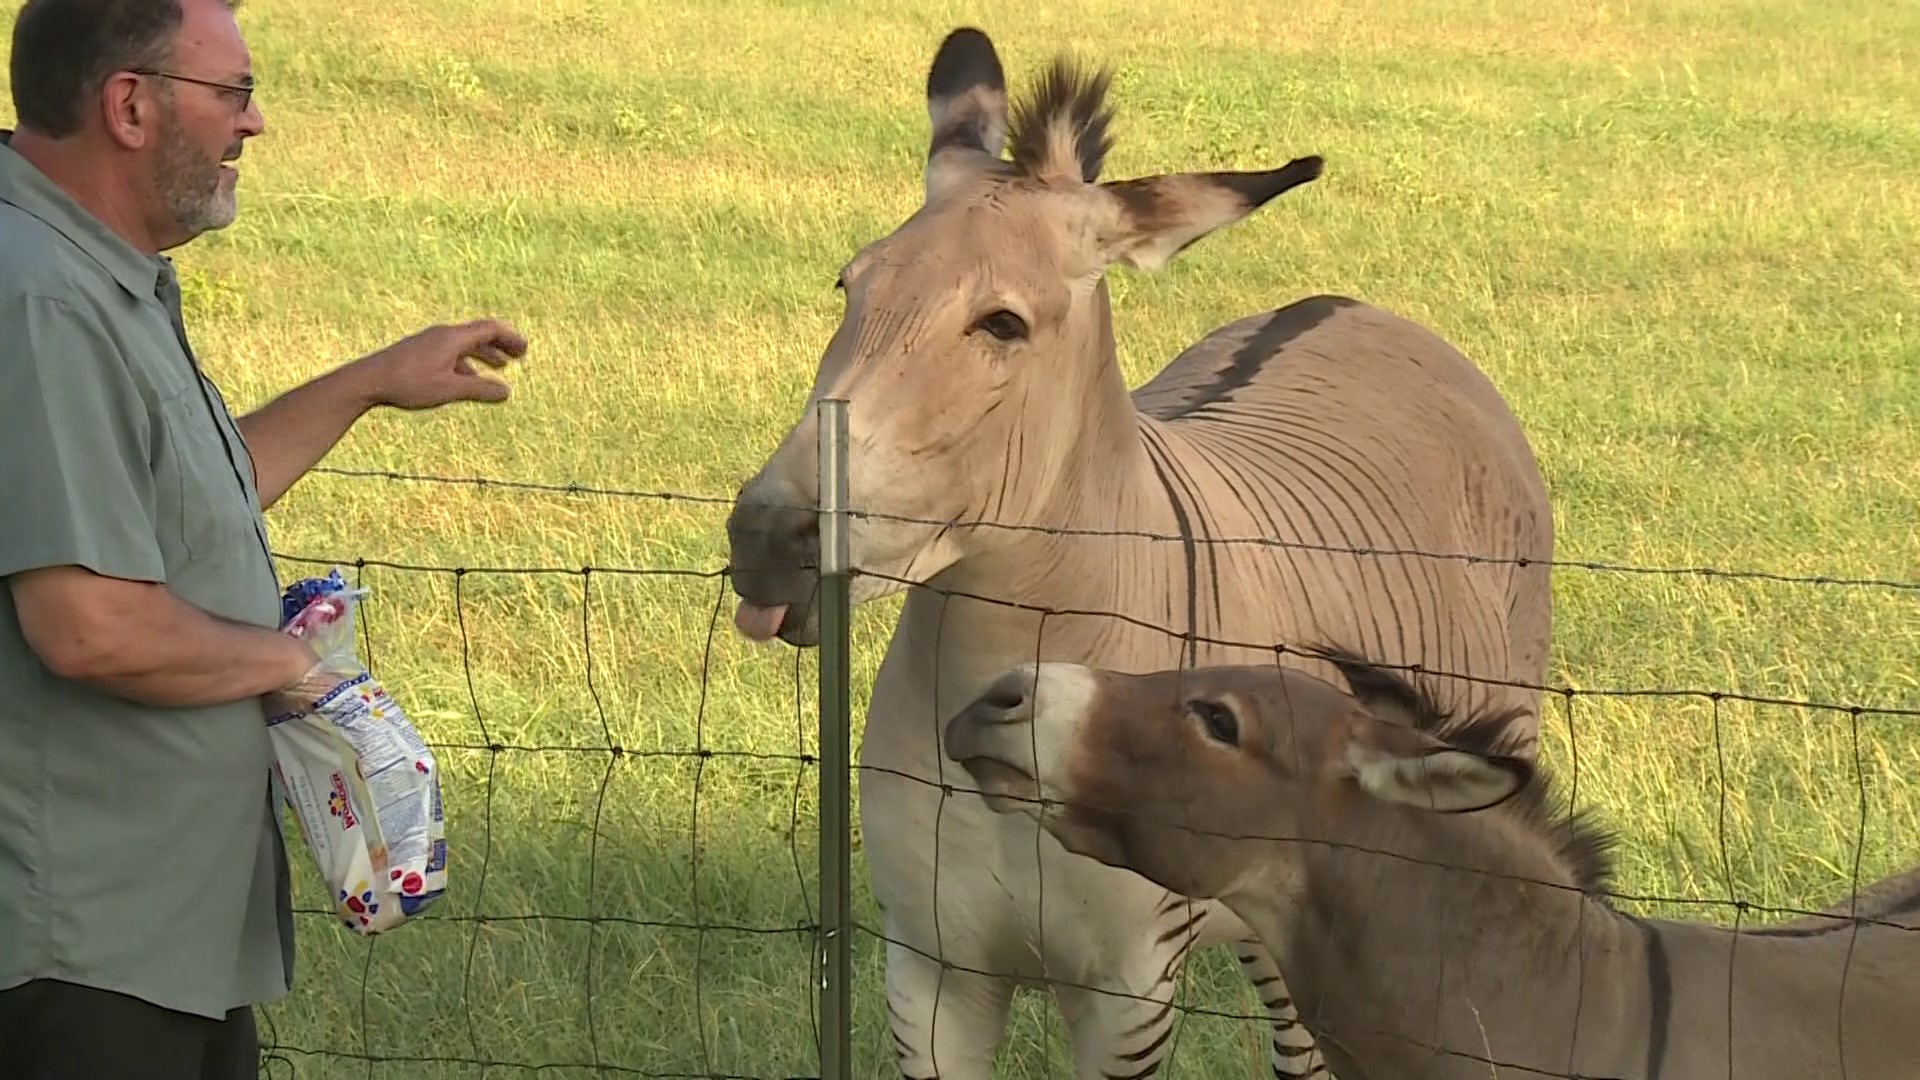 Zander the "zonkey" reportedly loves watermelons, apples, and his miniature donkey friend Drago.